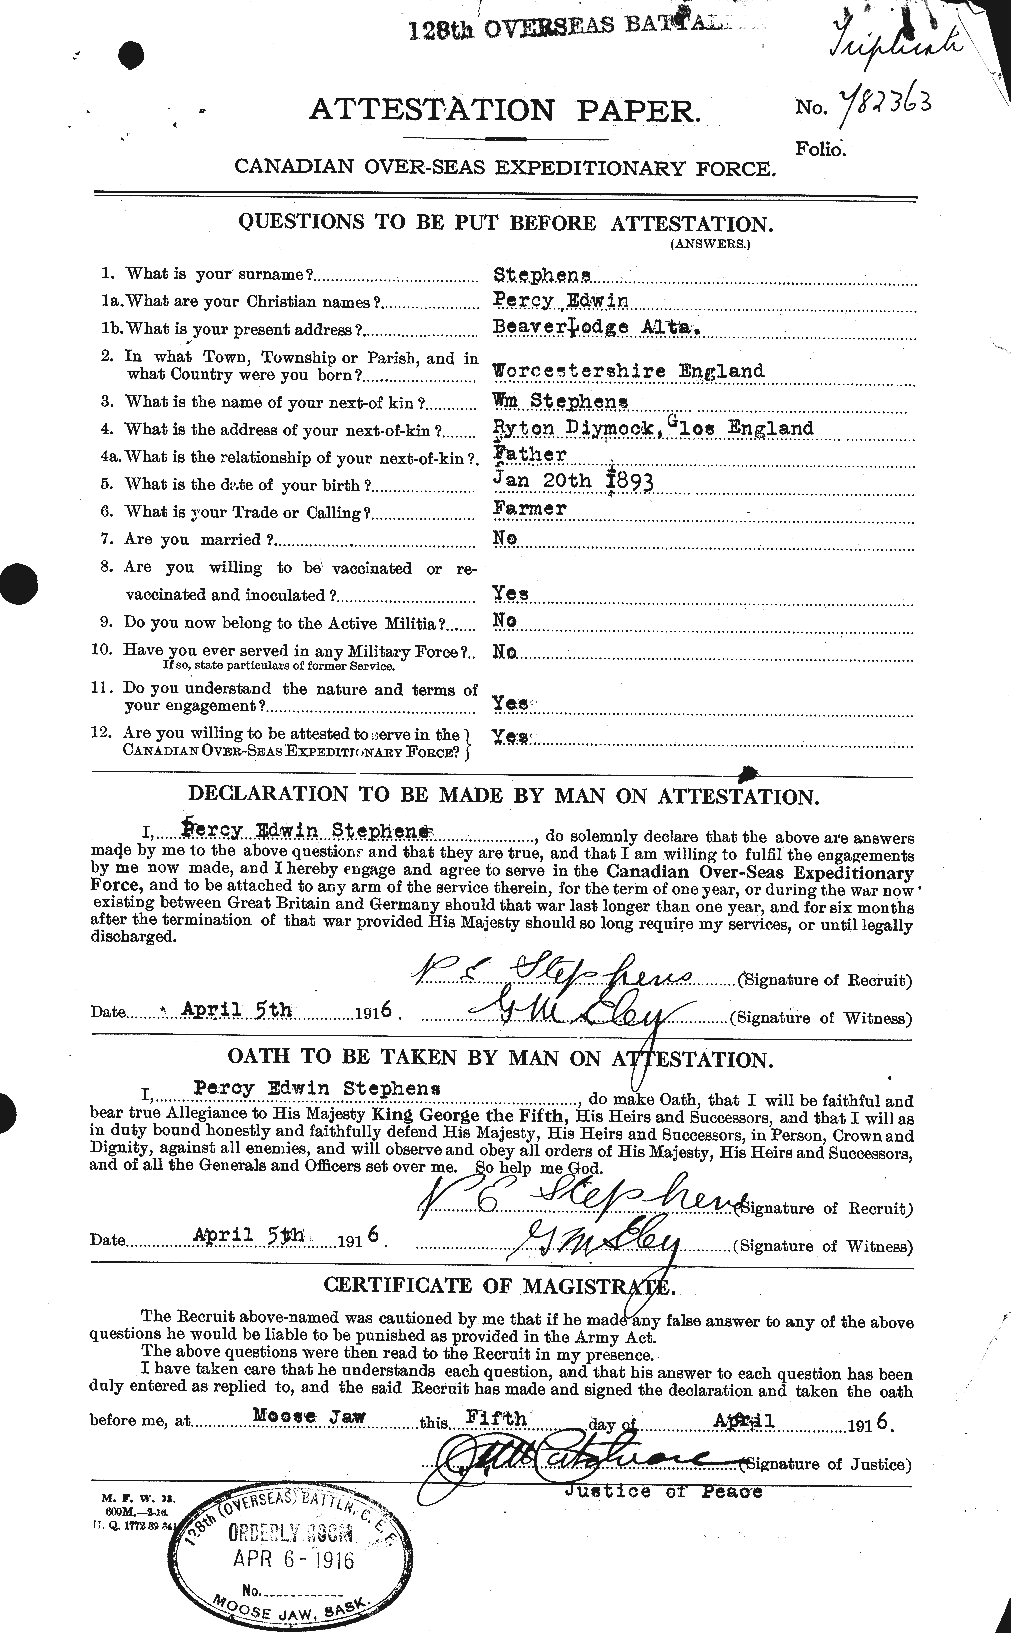 Personnel Records of the First World War - CEF 117601a